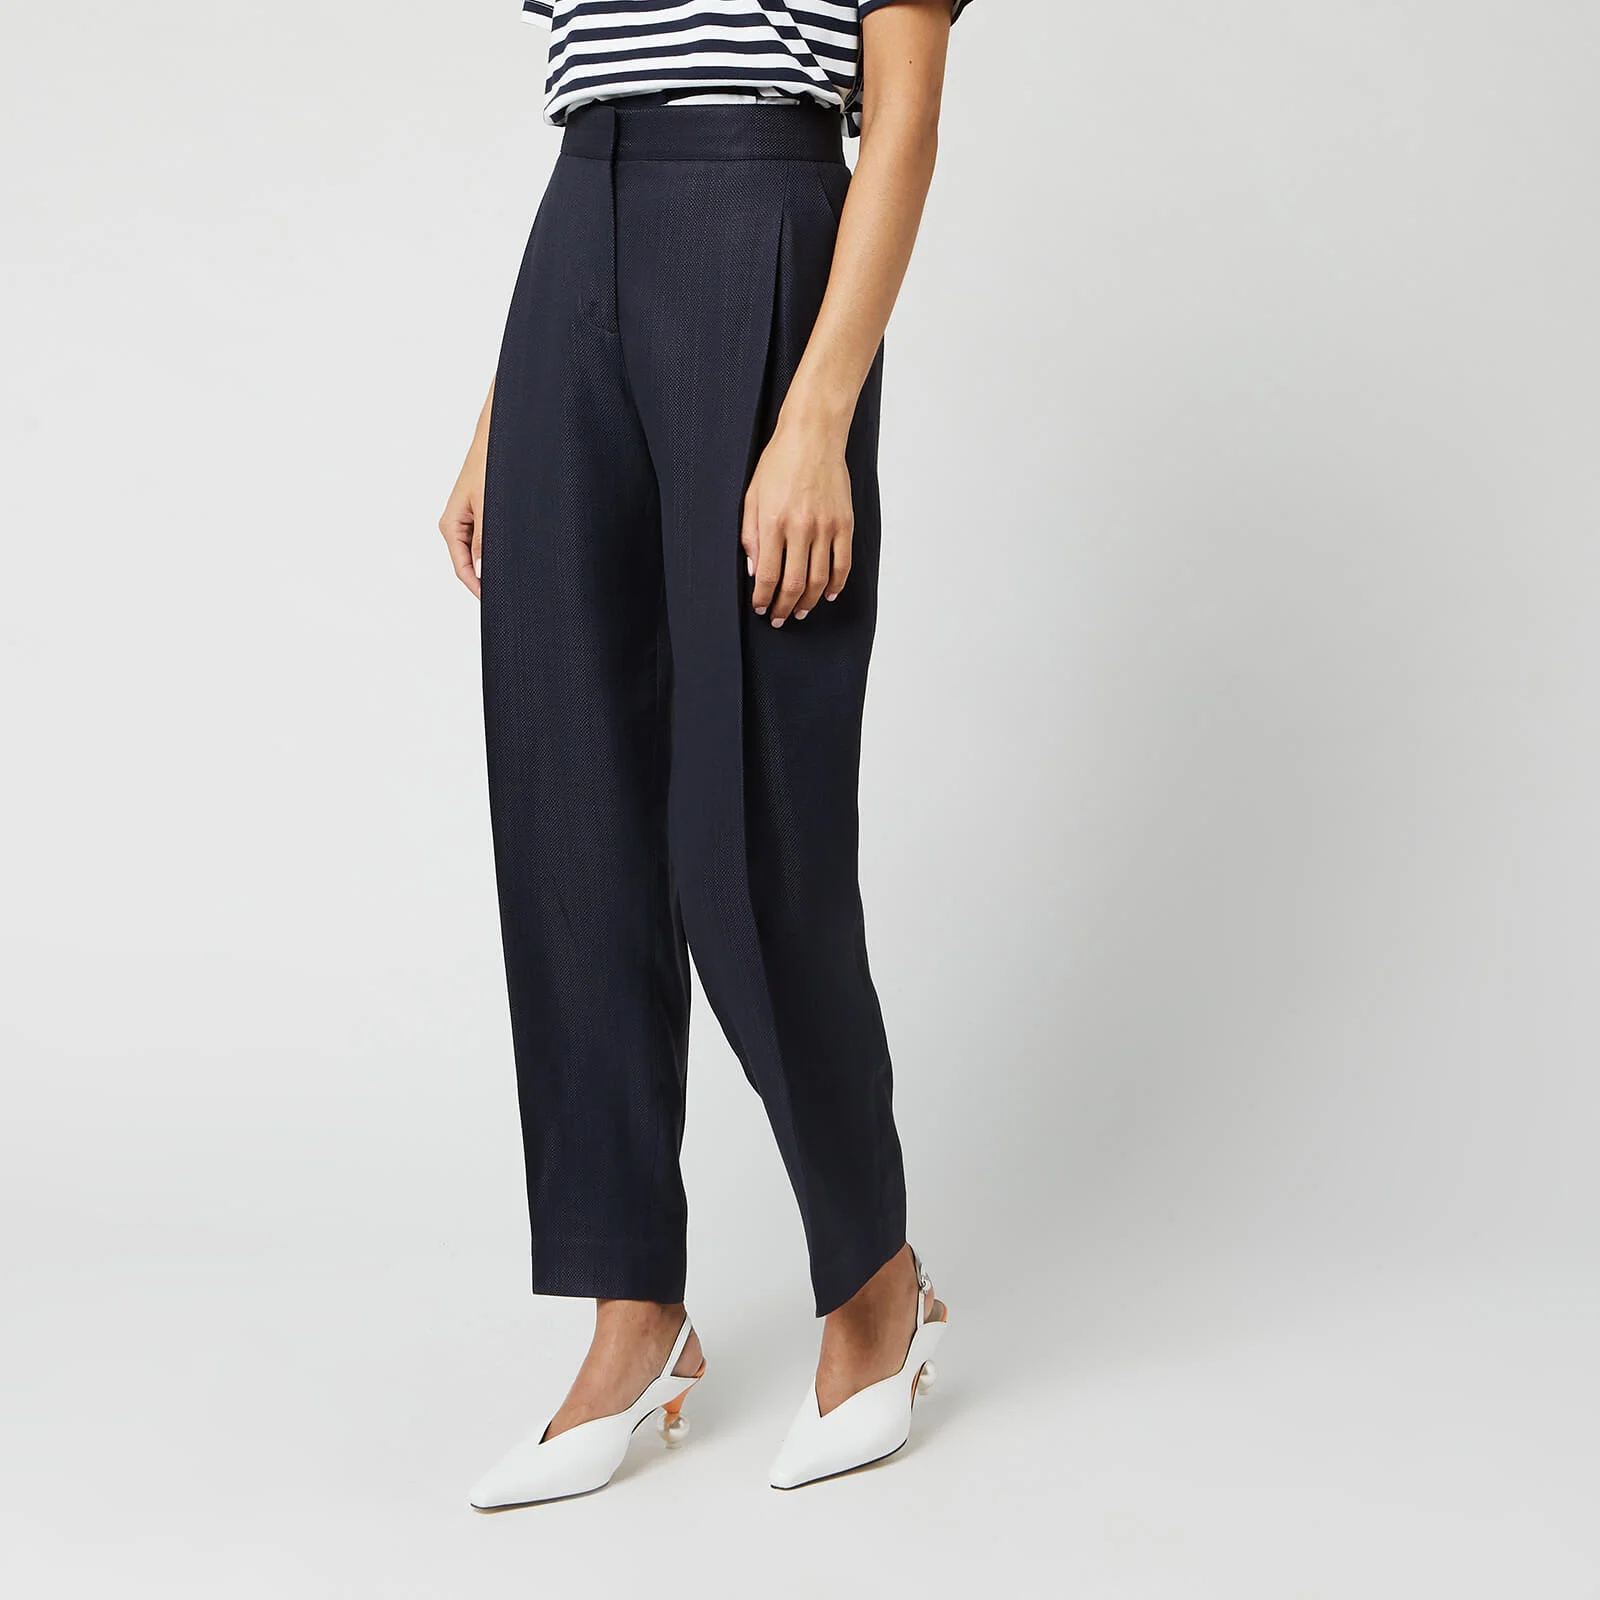 Victoria, Victoria Beckham Women's Tapered Trousers - Midnight Blue Image 1